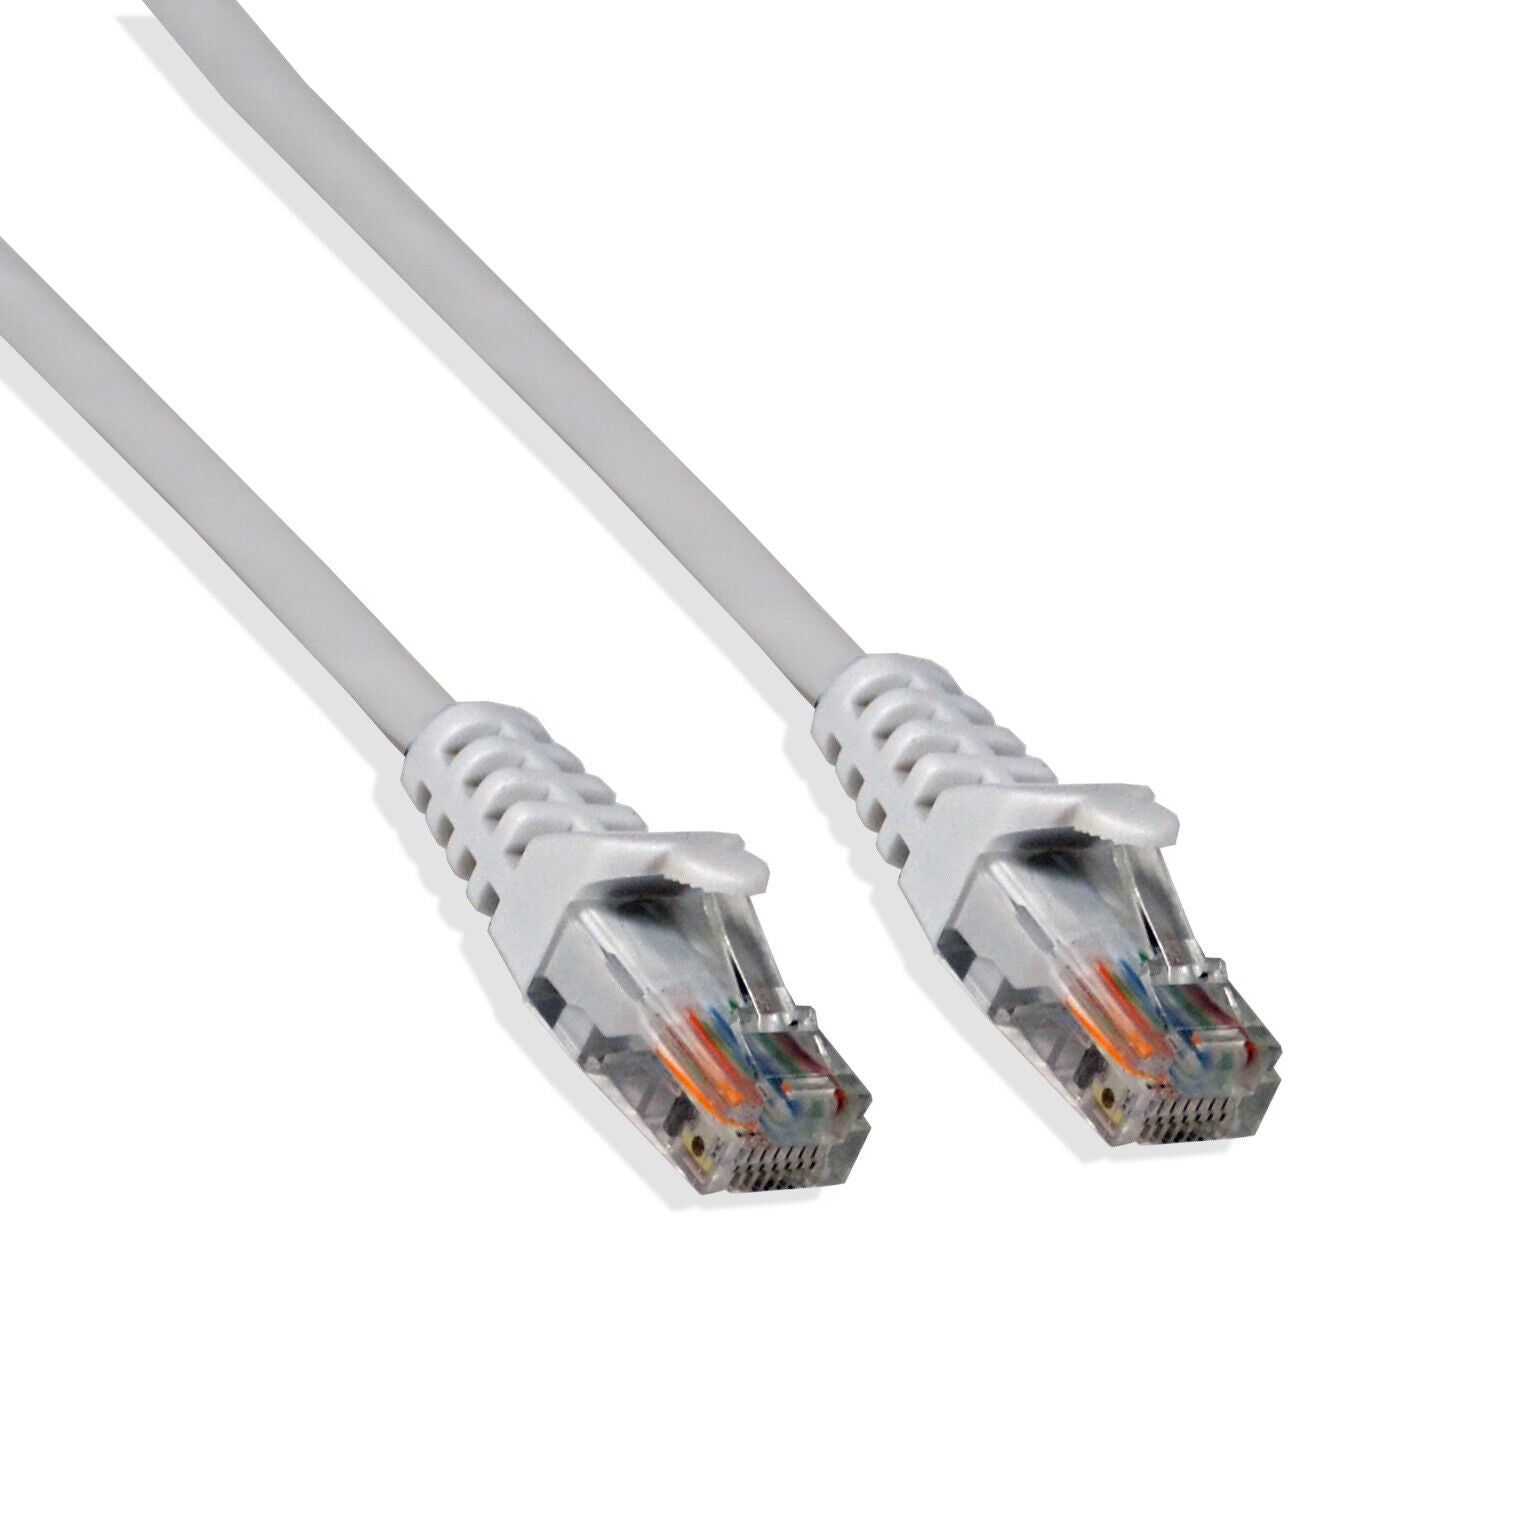 Patch Cord HD Cat5e 5 Foot (PC5E5FT-WH) (White) New